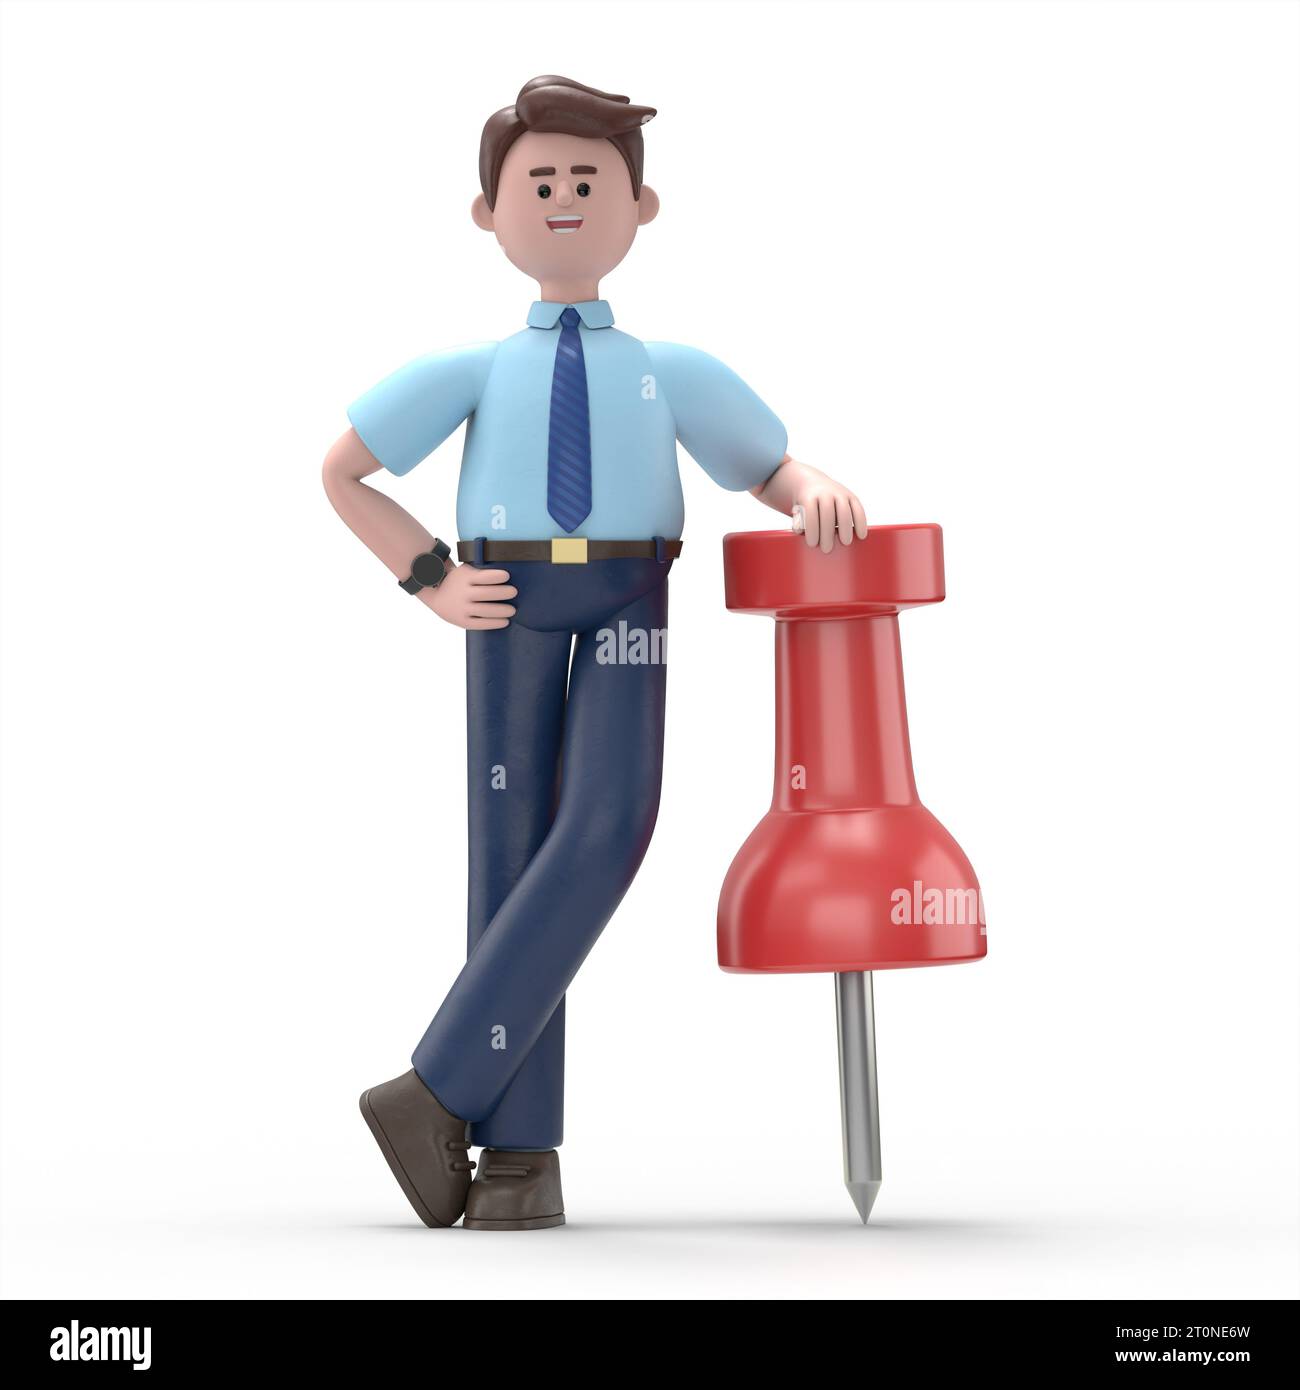 3D illustration of Asian man Felix figure with pin needle.3D rendering on white background. Stock Photo